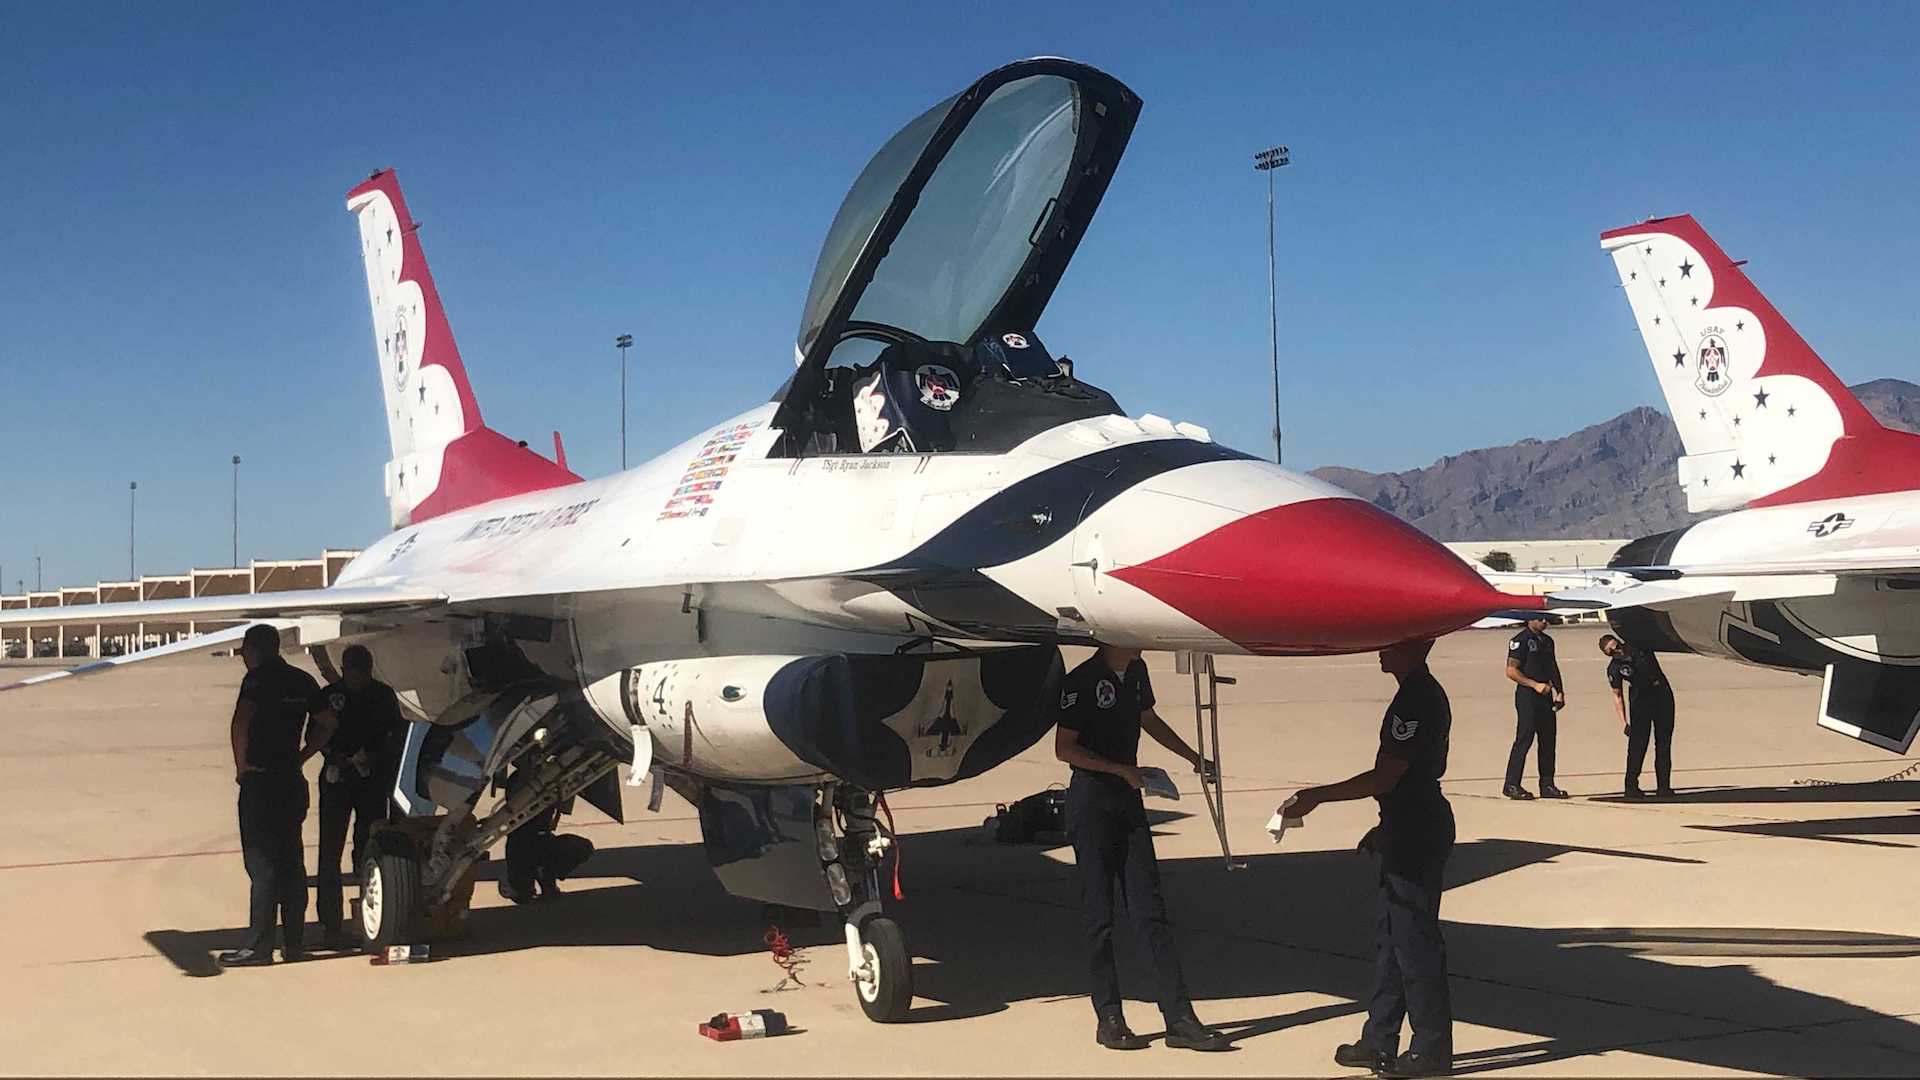 Major Michael Brewer's F-16 at Davis-Monthan Air Force Base ahead of an air show in November 2021.